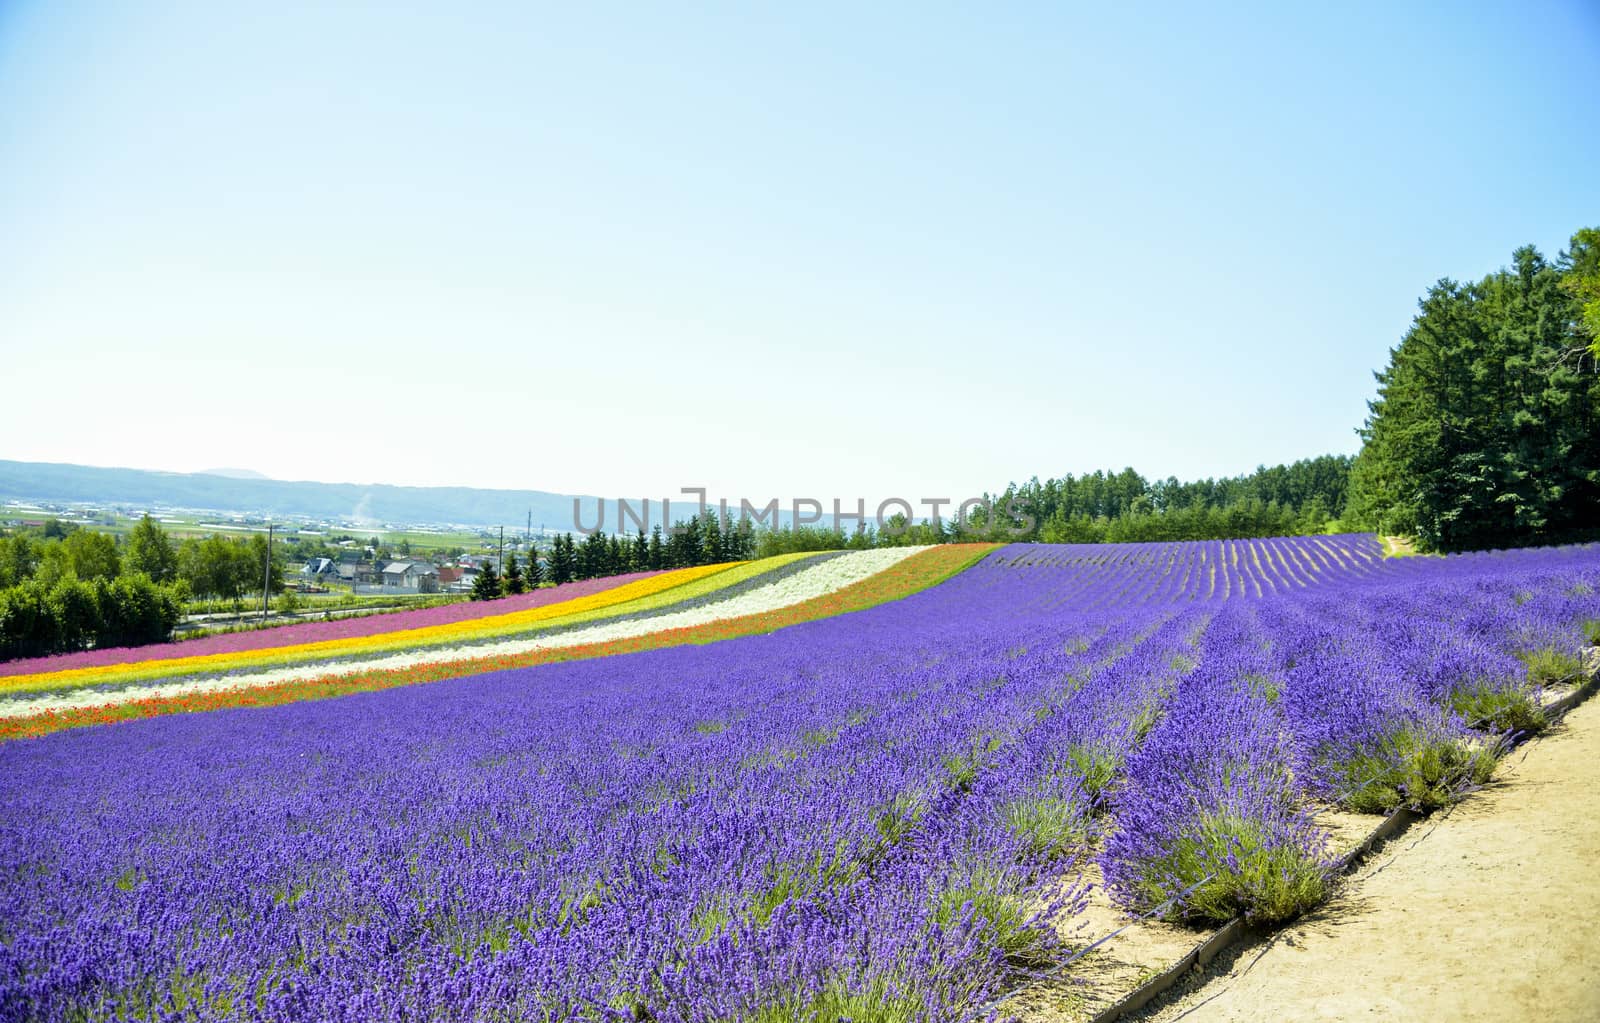 Lavender field in the row2